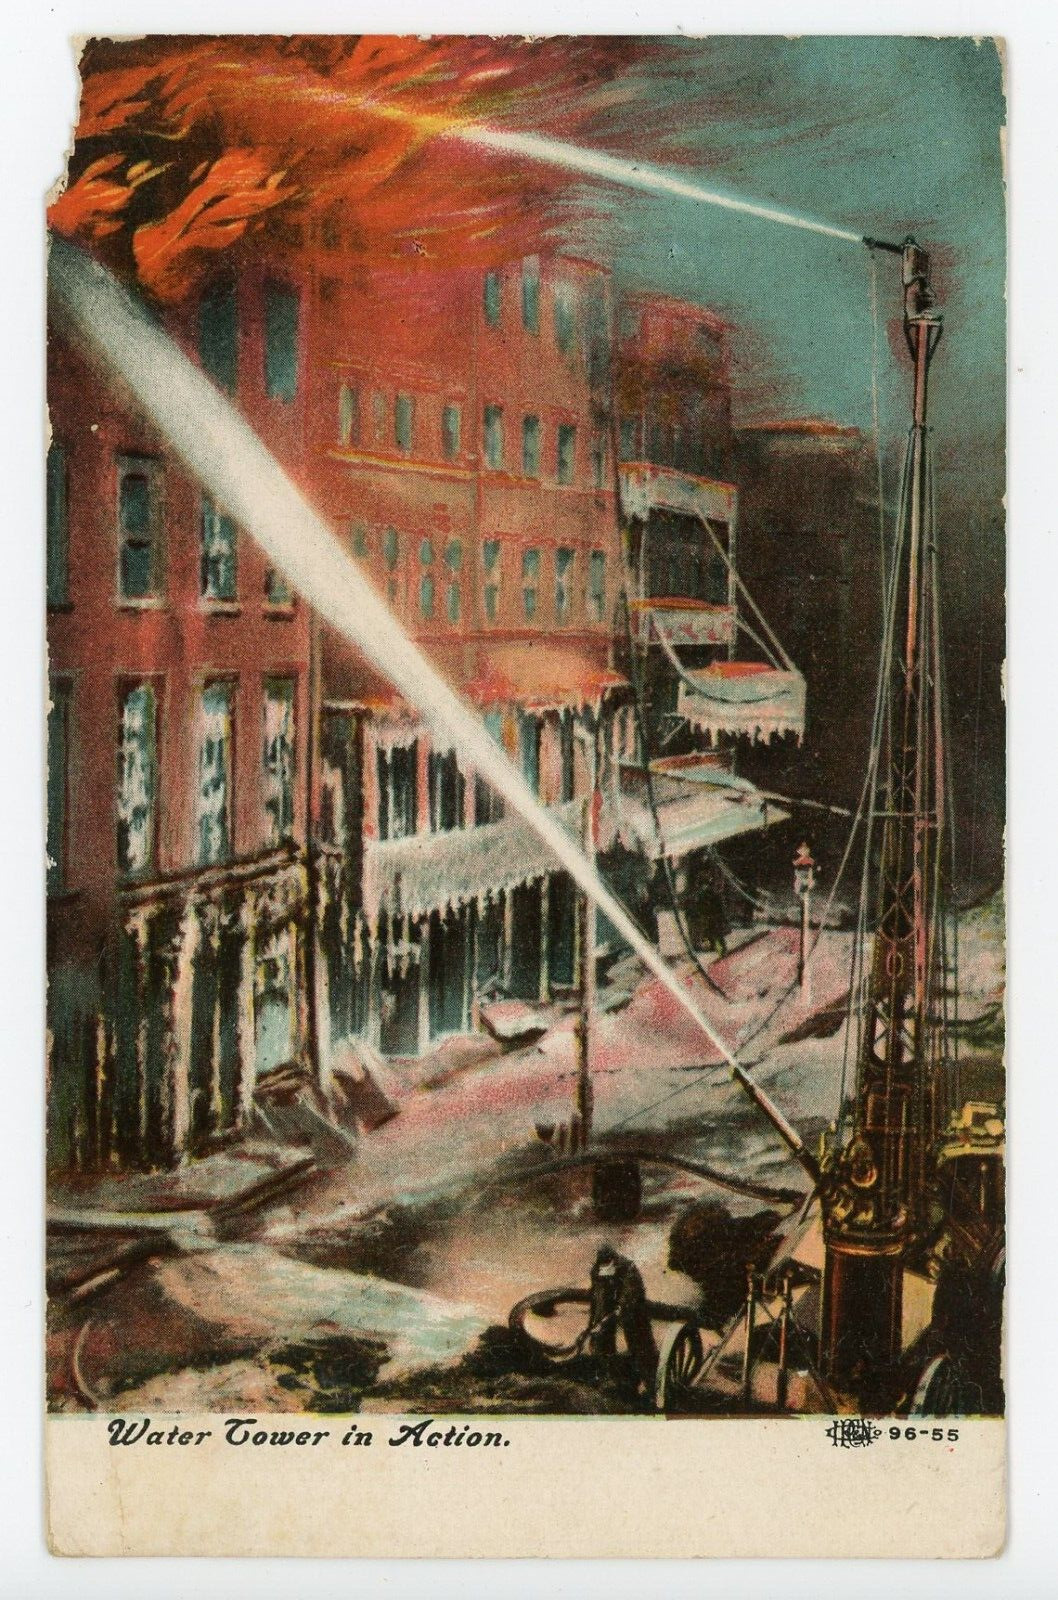 Antique Postcard Water Tower in Action Burning Buildings New York City NY Posted